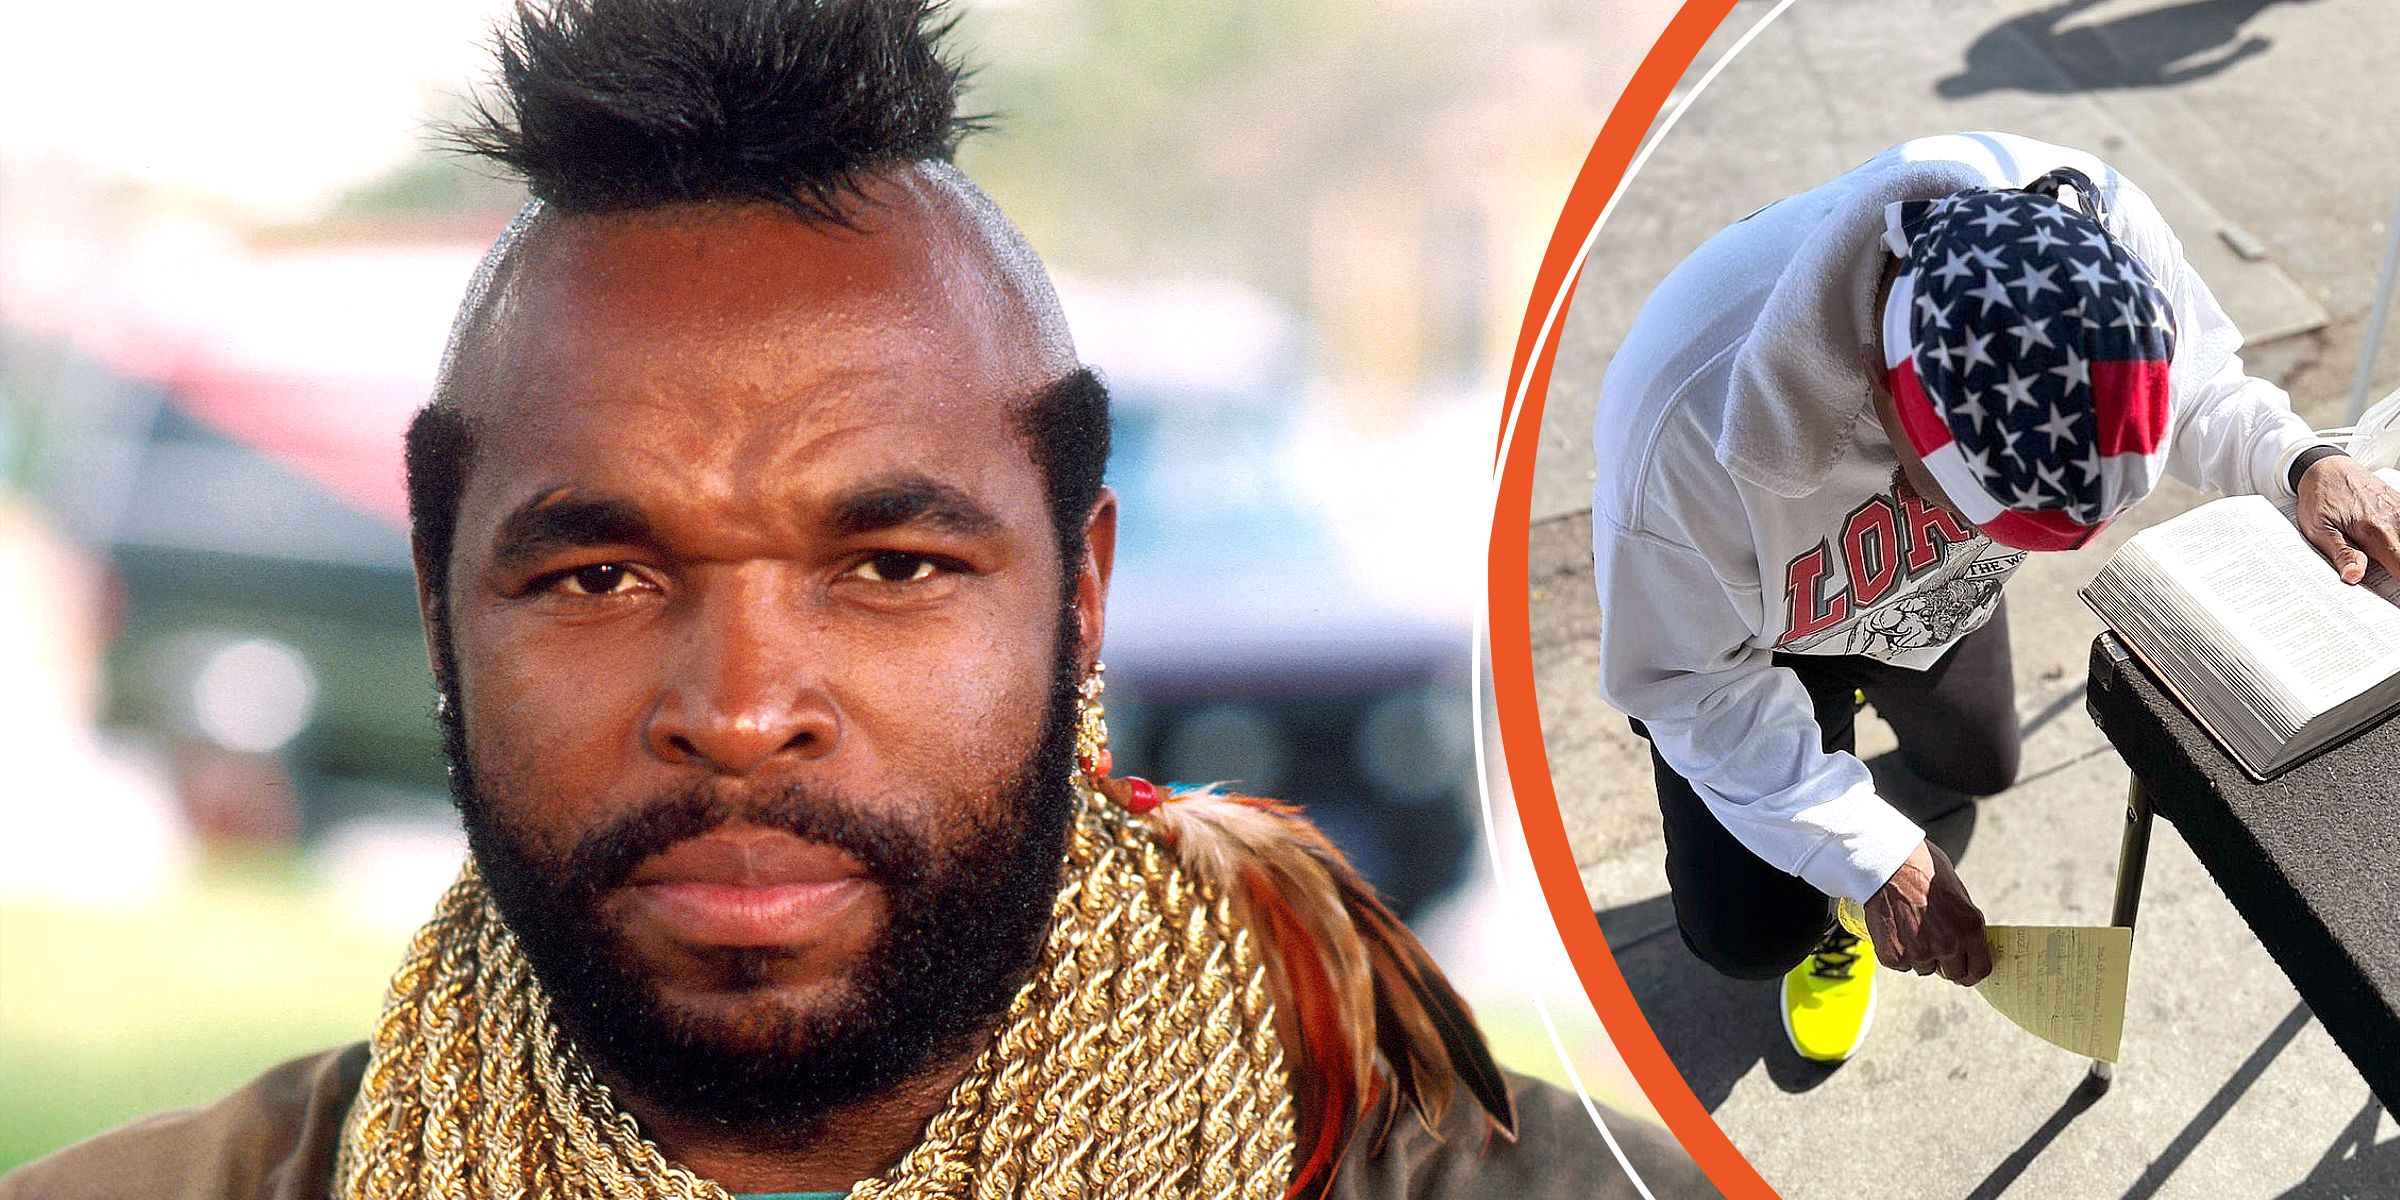 Mr. T. | Source: instagram.com/officialipitythefool Getty Images